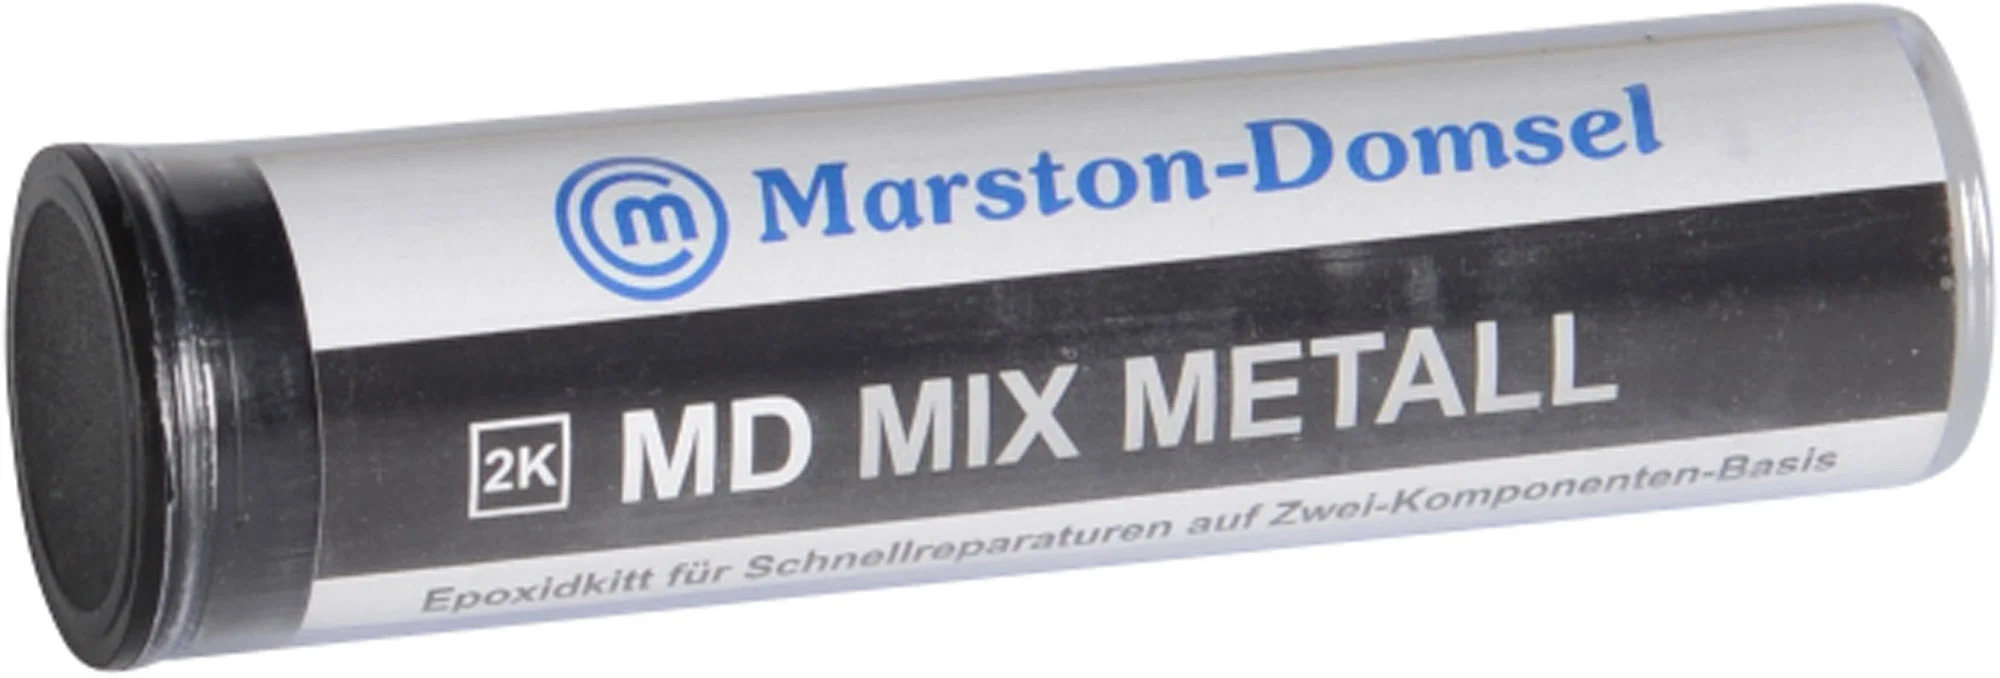 MD-MIX METAAL